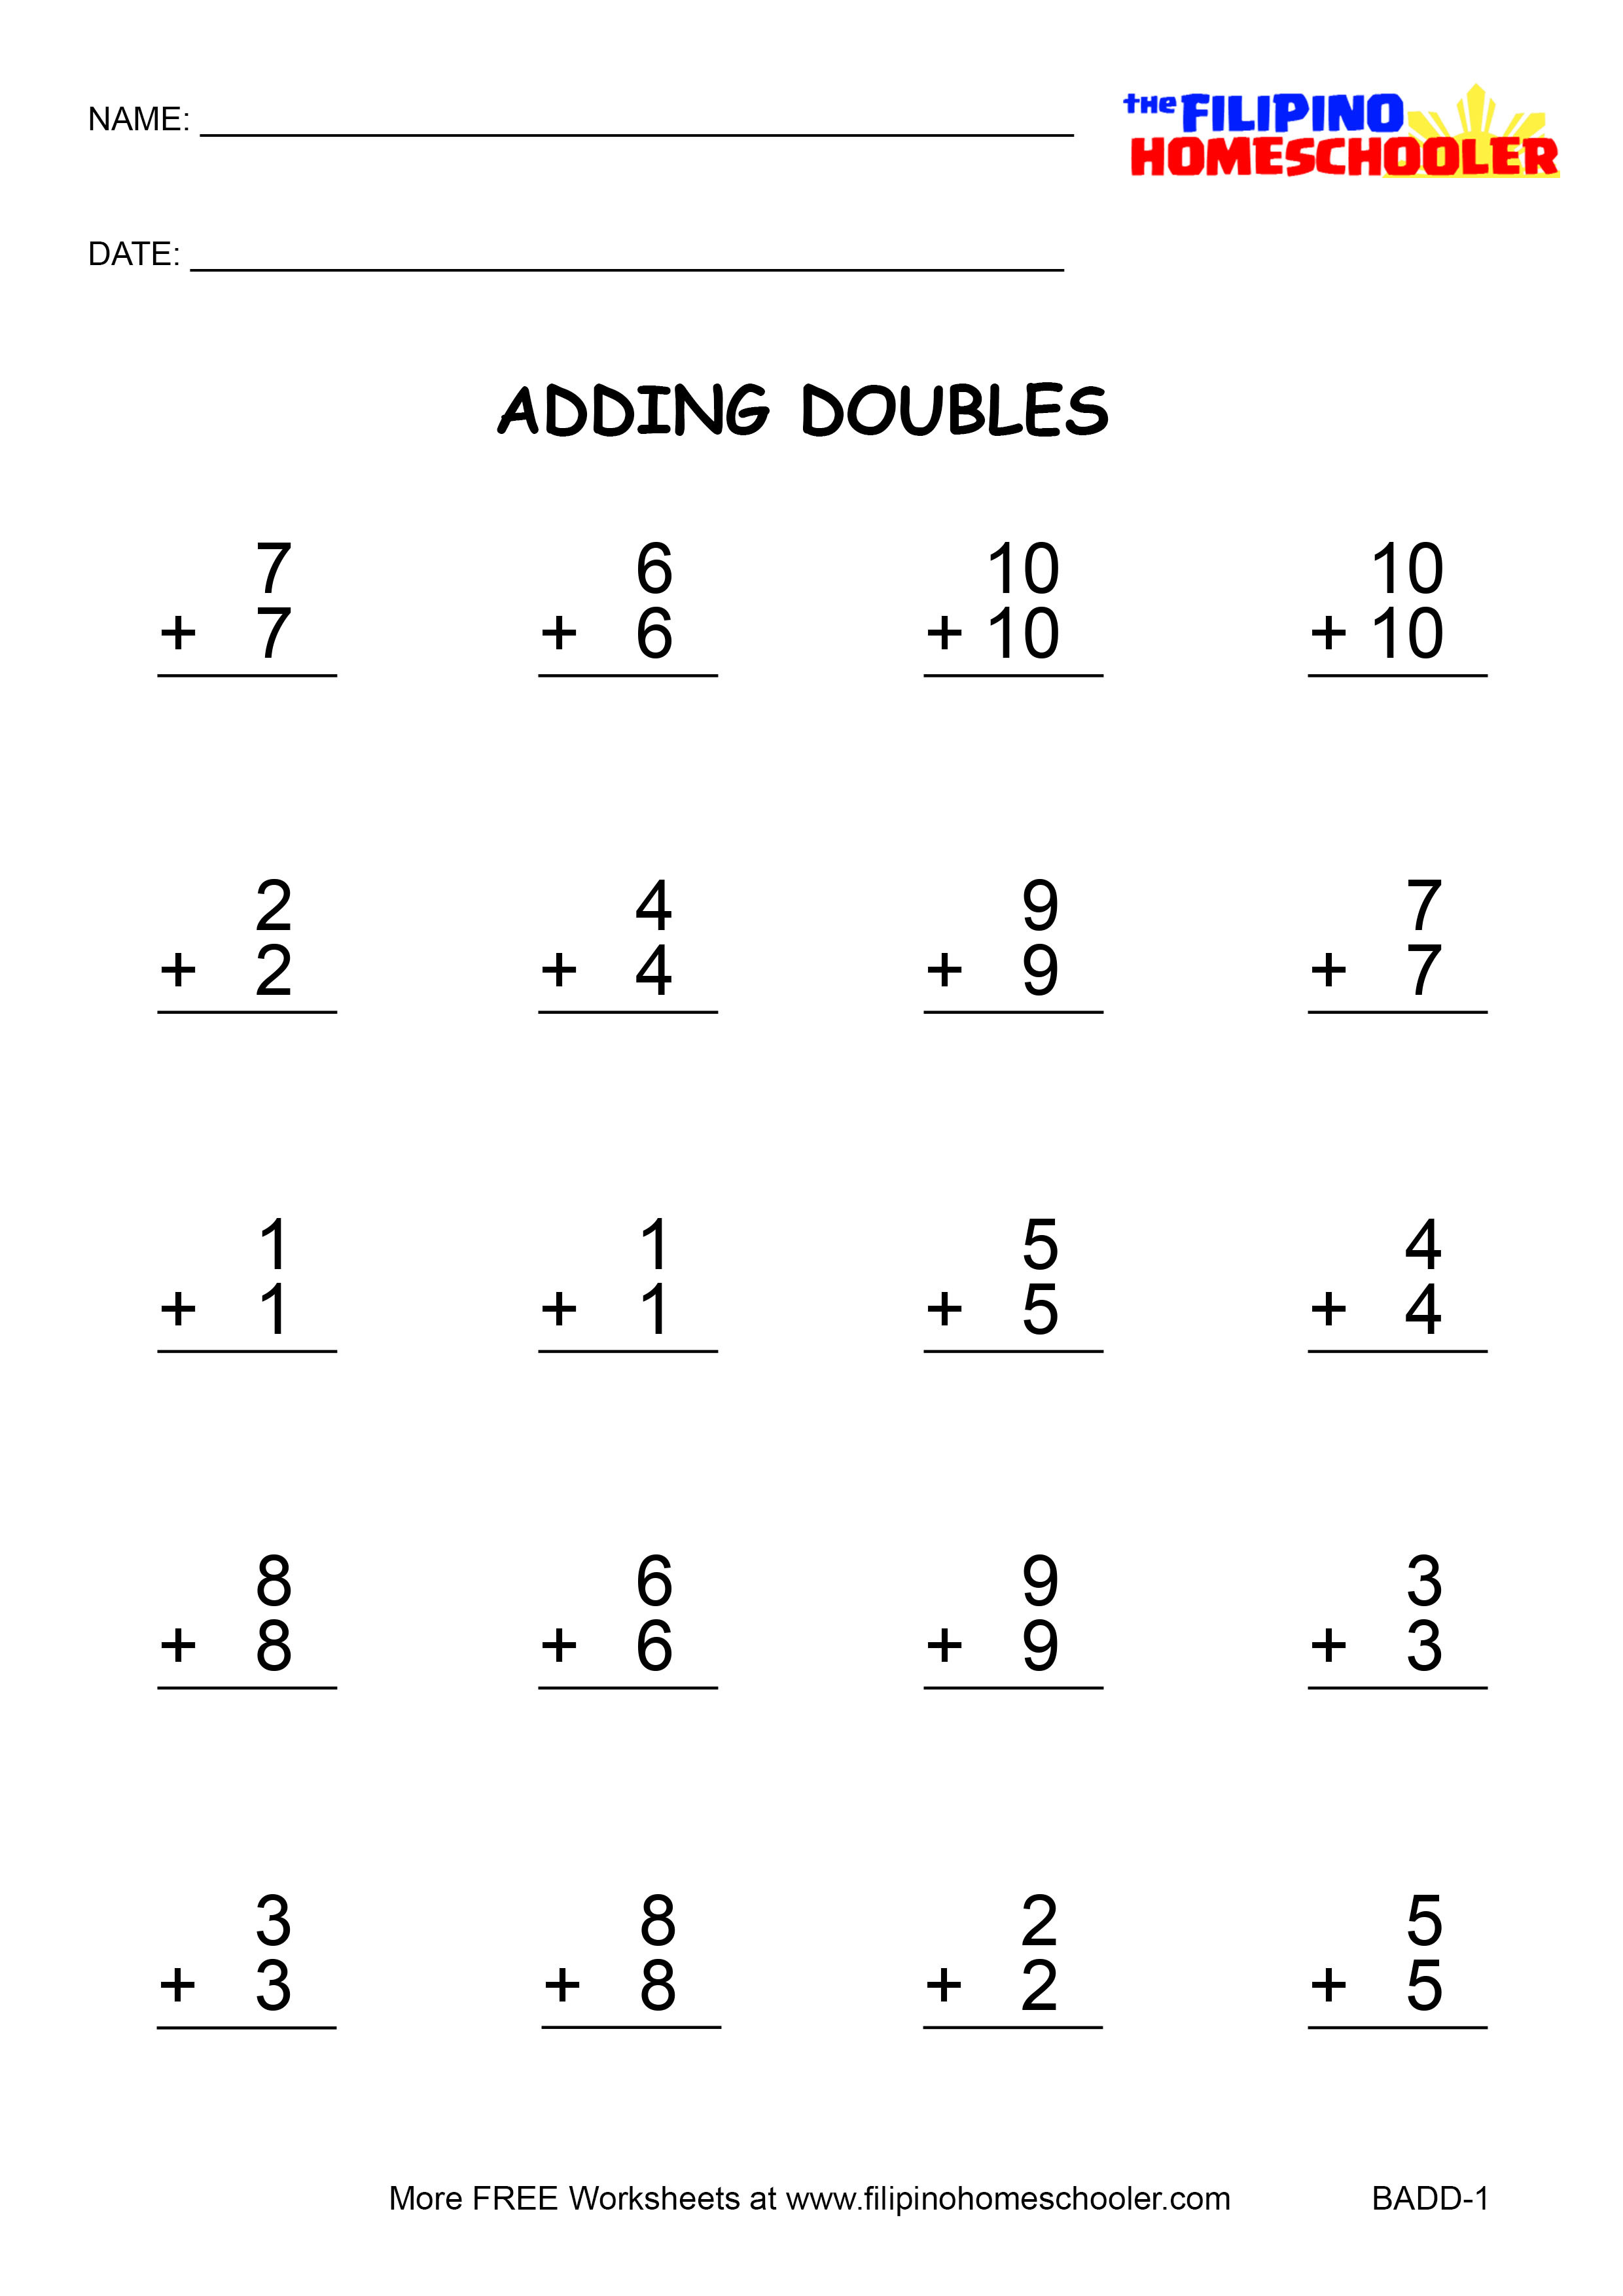 Adding Doubles Worksheets And Teaching Strategies – The